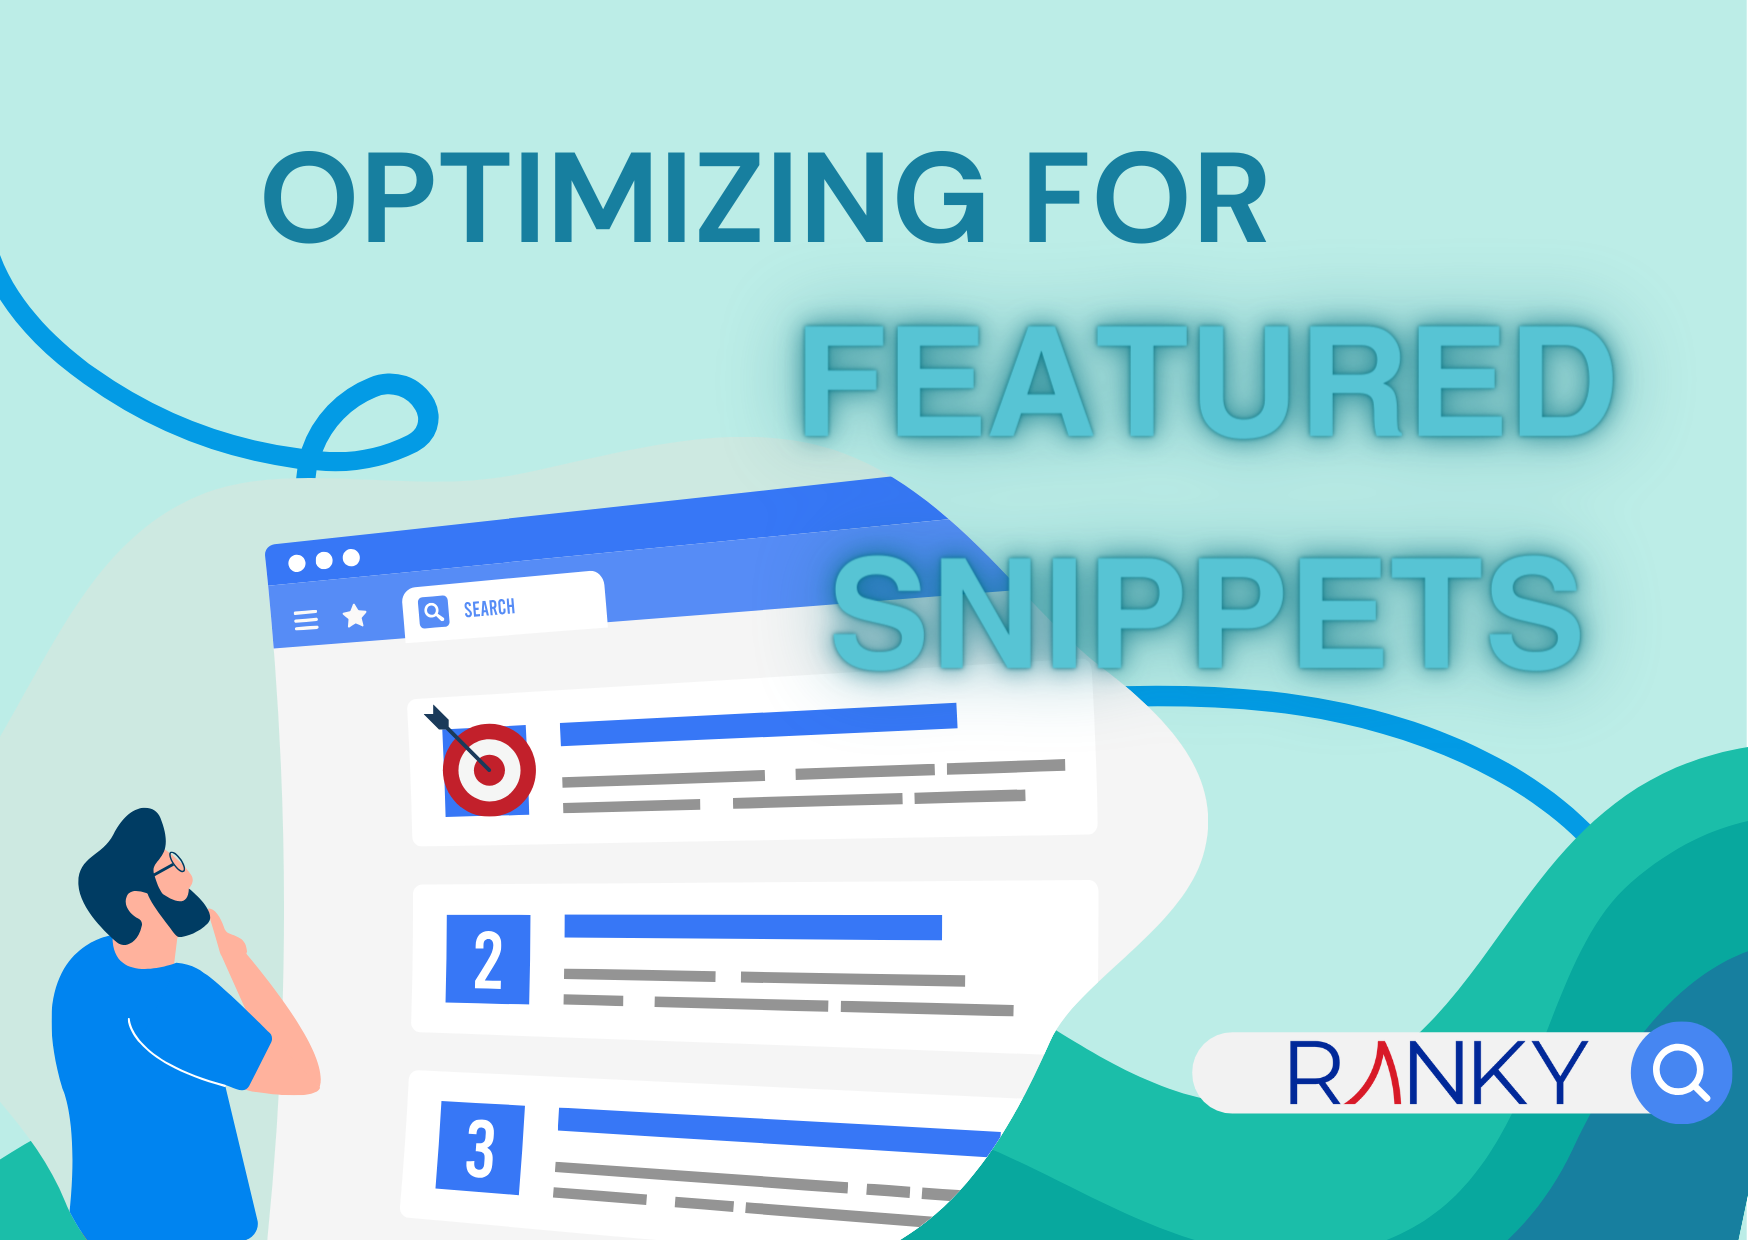 Reaching The Top Spot: How to Optimize for Featured Snippets